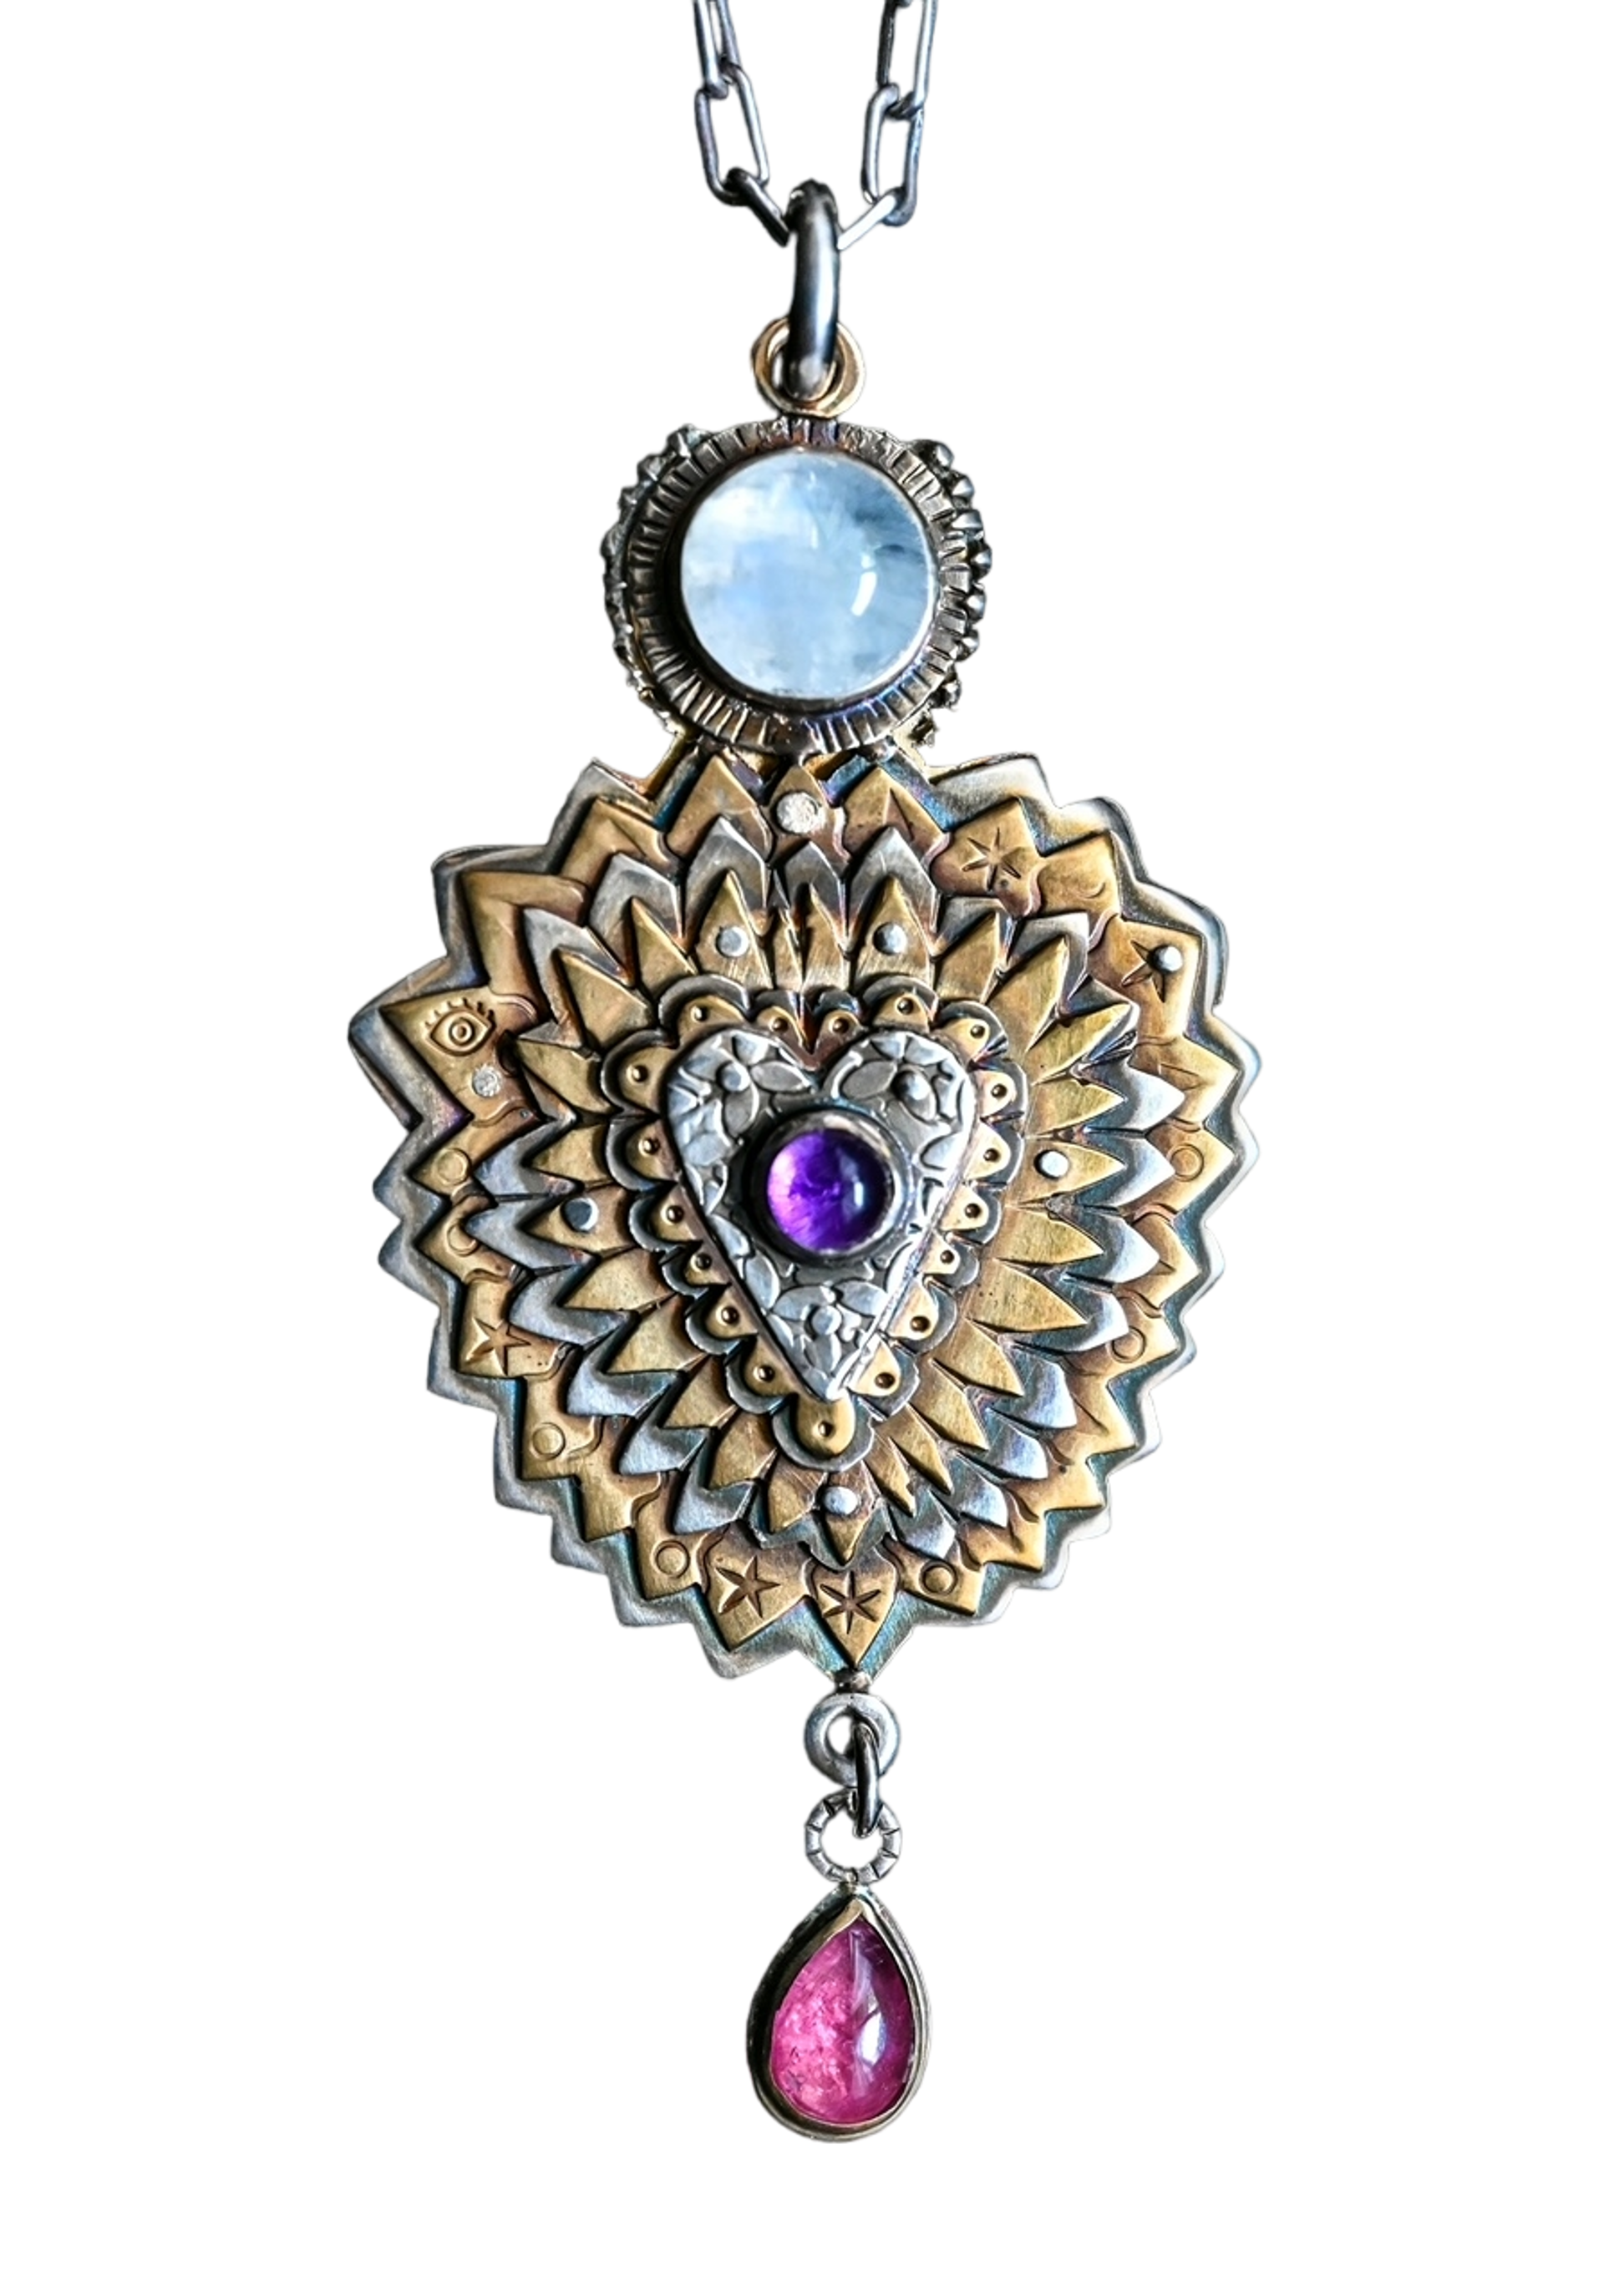 Flaming Heart Pendant with Moonstone, Amethyst, Pink Tourmaline by Tabor Porter